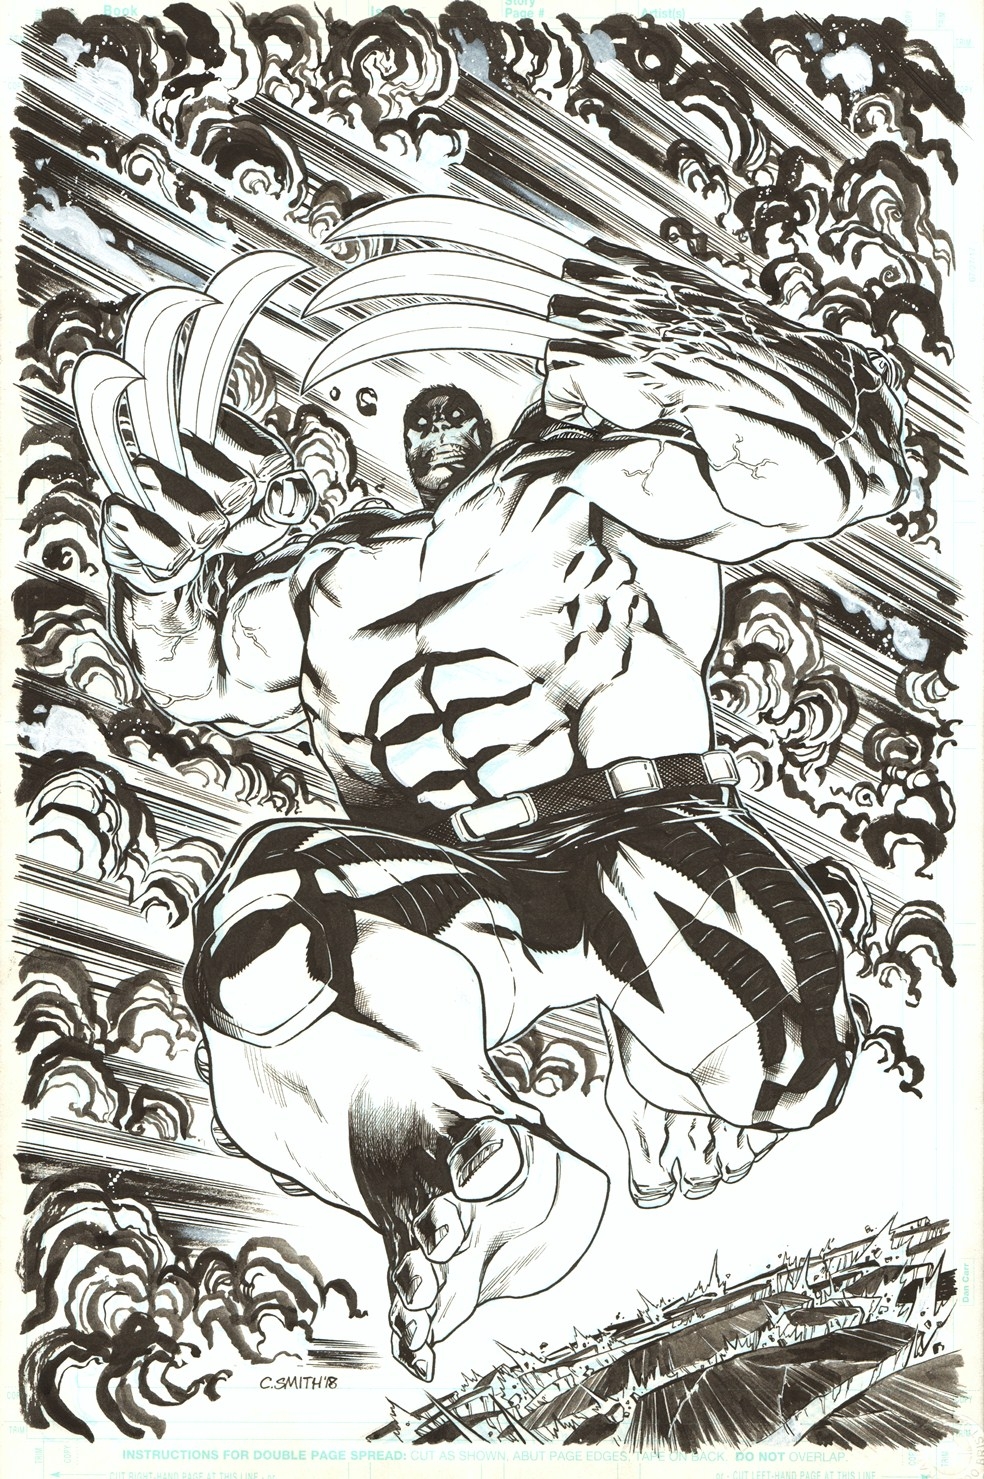 Weapon H #3 variant COVER by Cory Smith (ft Hulk/Wolverine hybrid), in K  Gearon's Published Art MARVEL - 2010 to 2019 Comic Art Gallery Room